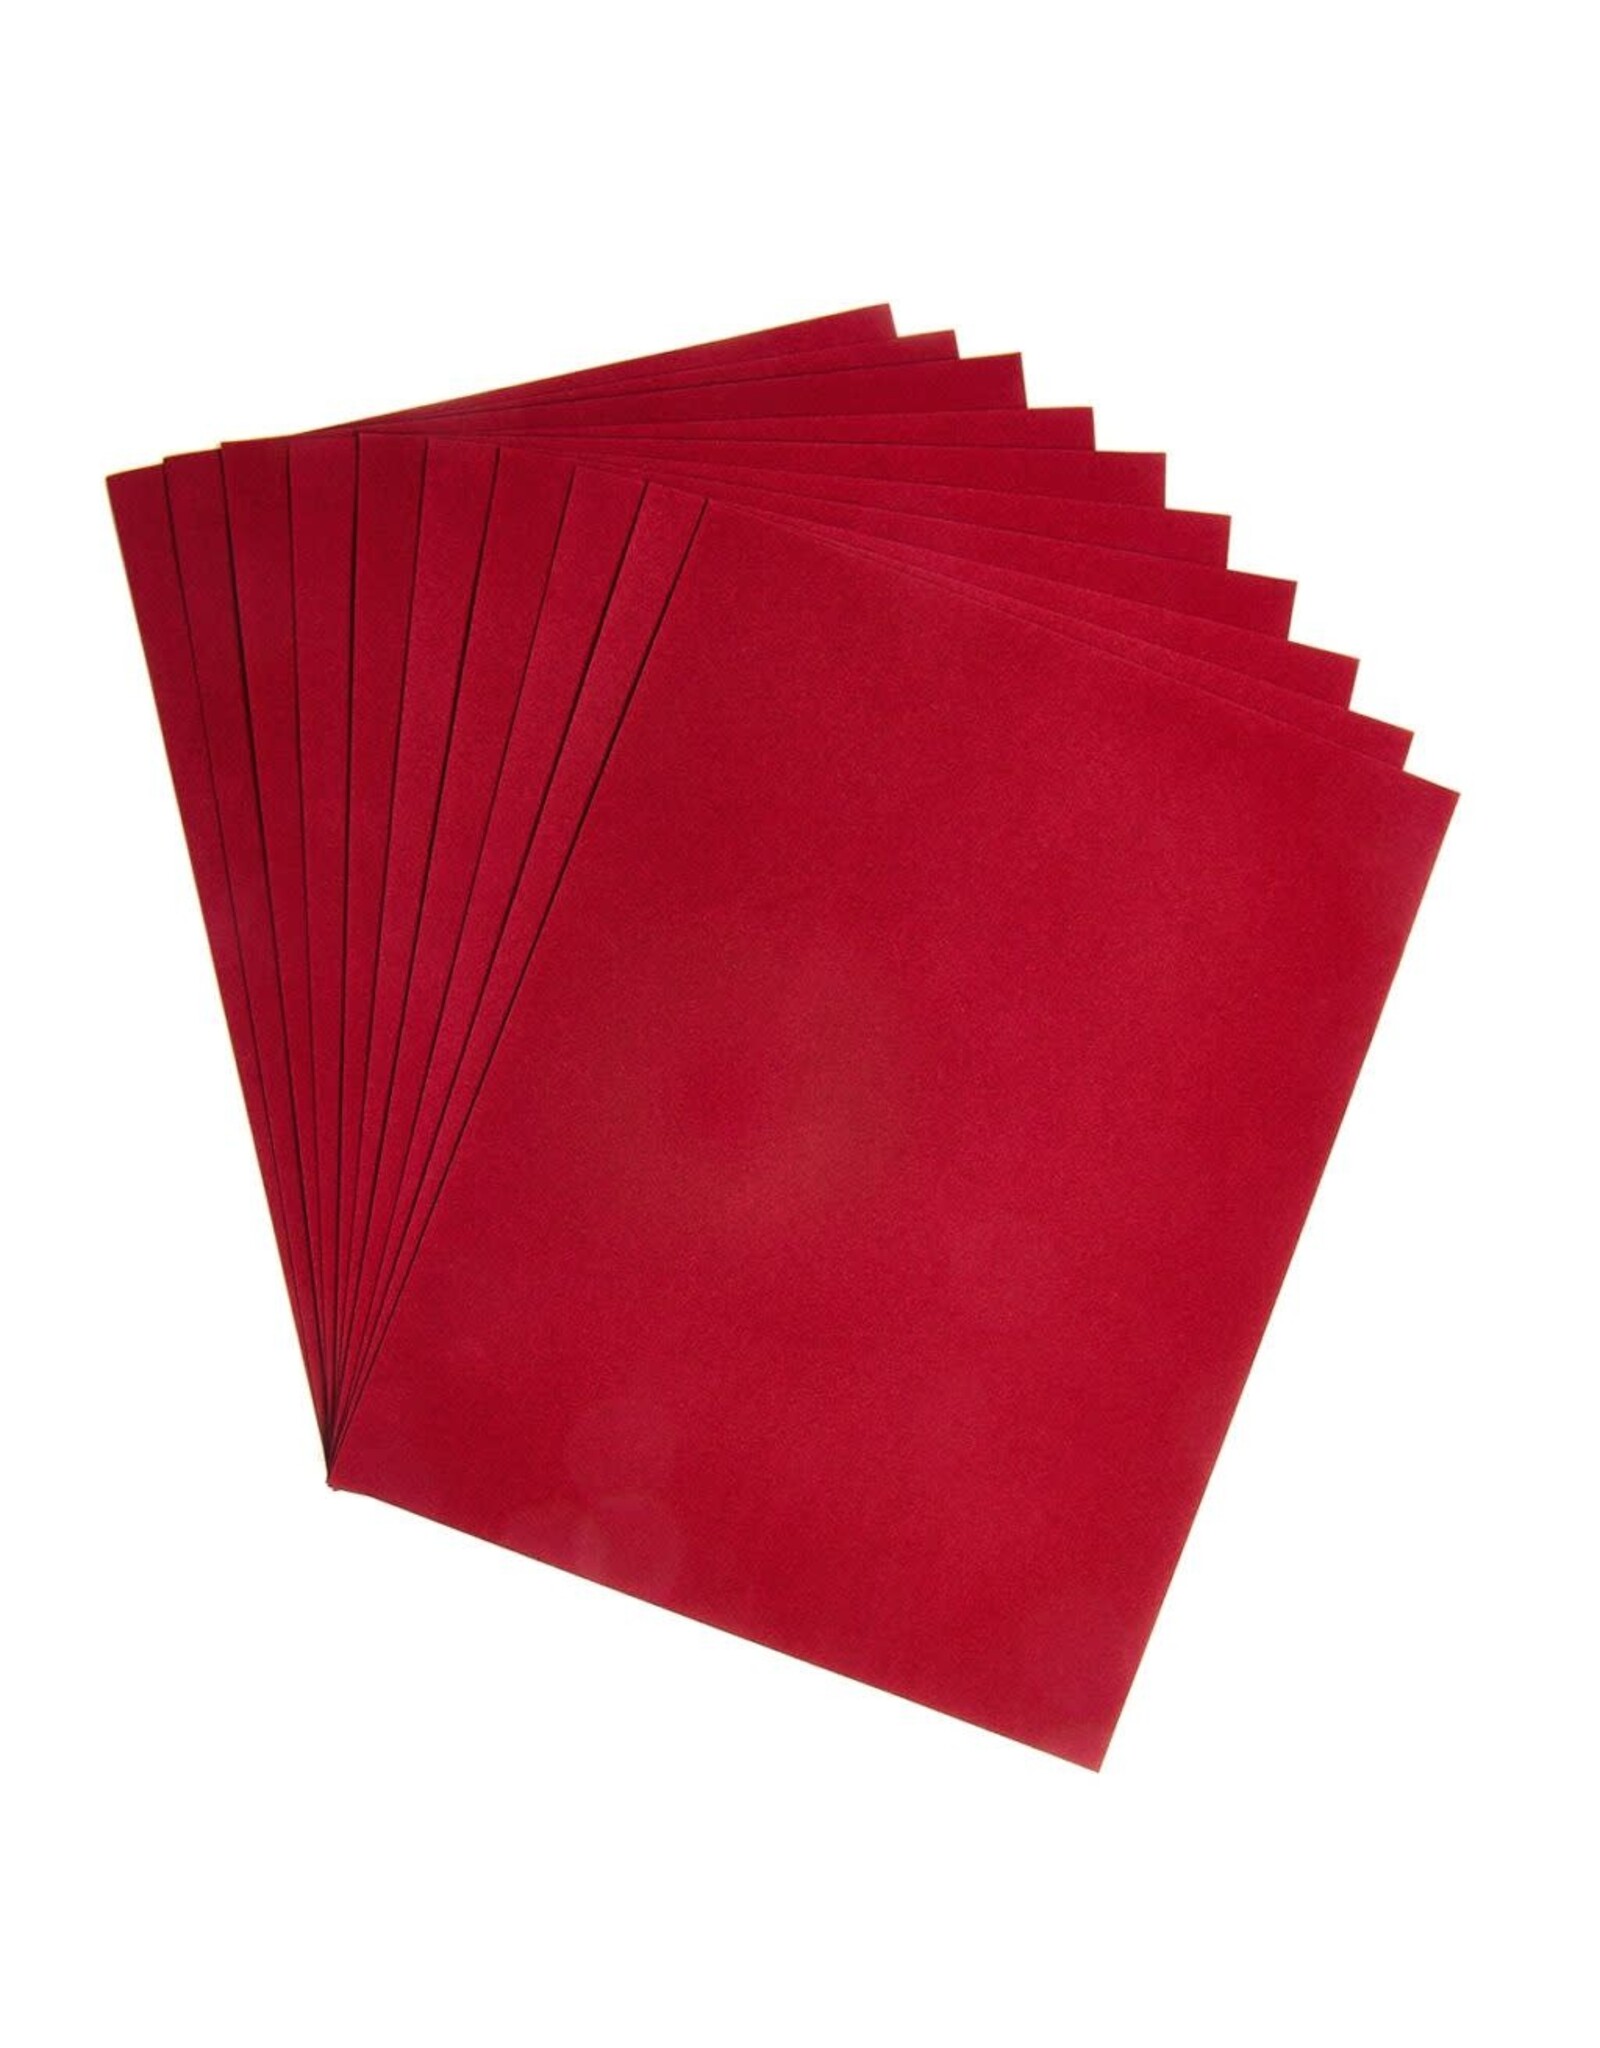 HYGLOSS VELOUR PAPER - 8.5x11 - RED 10 PACK